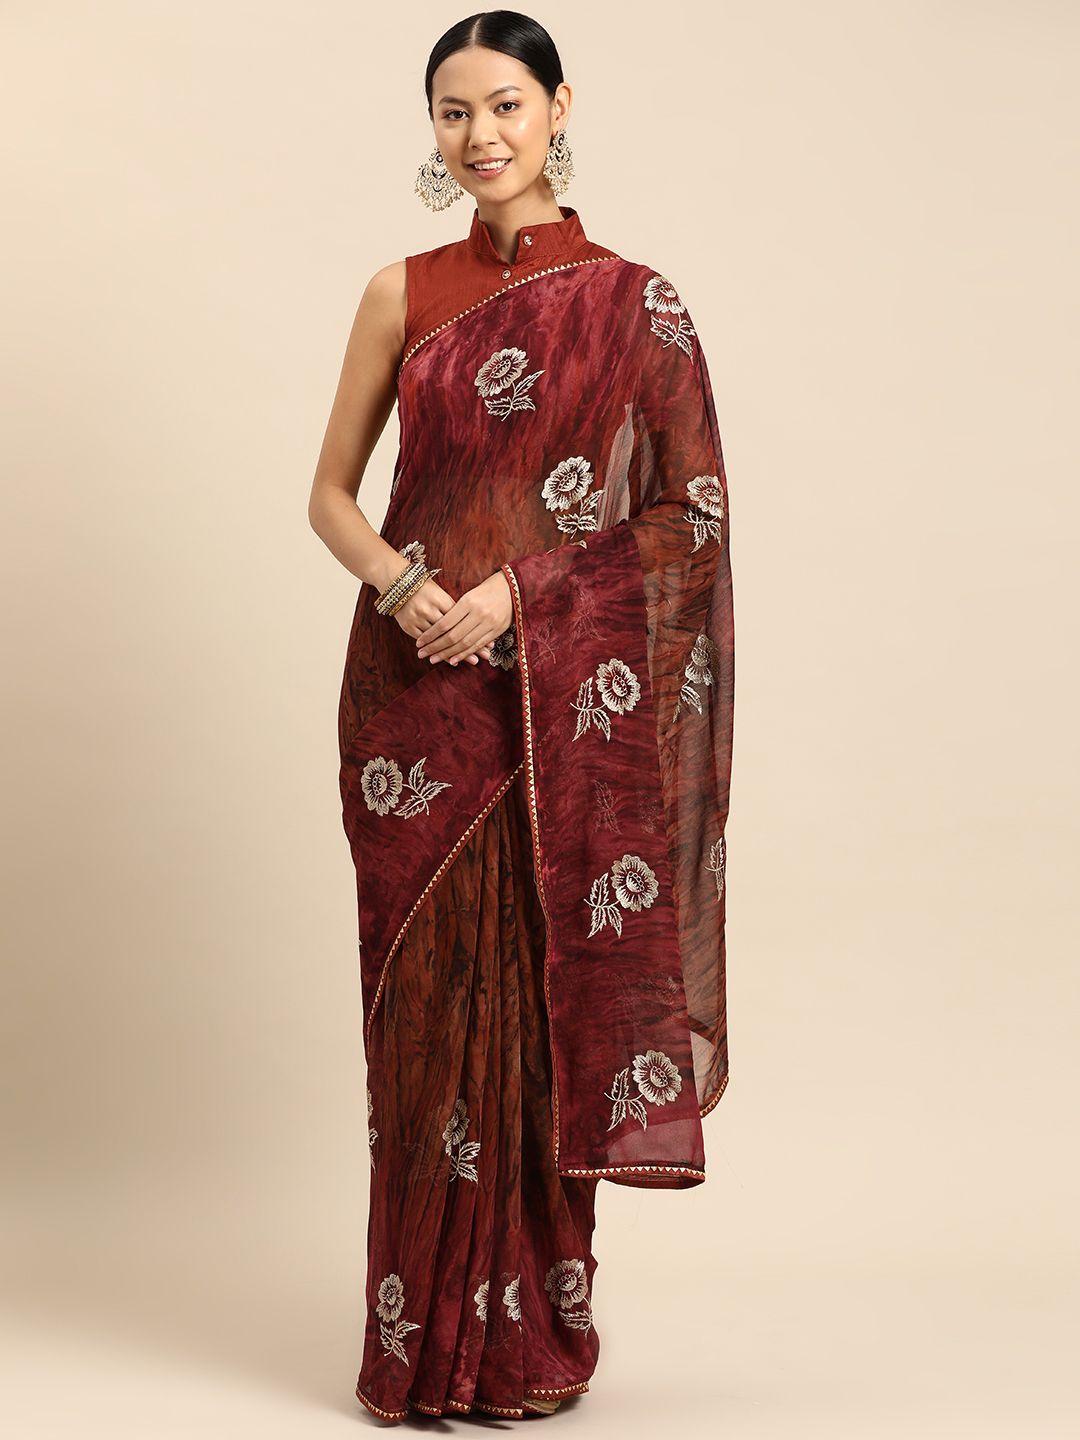 sutram floral embroidered poly georgette saree